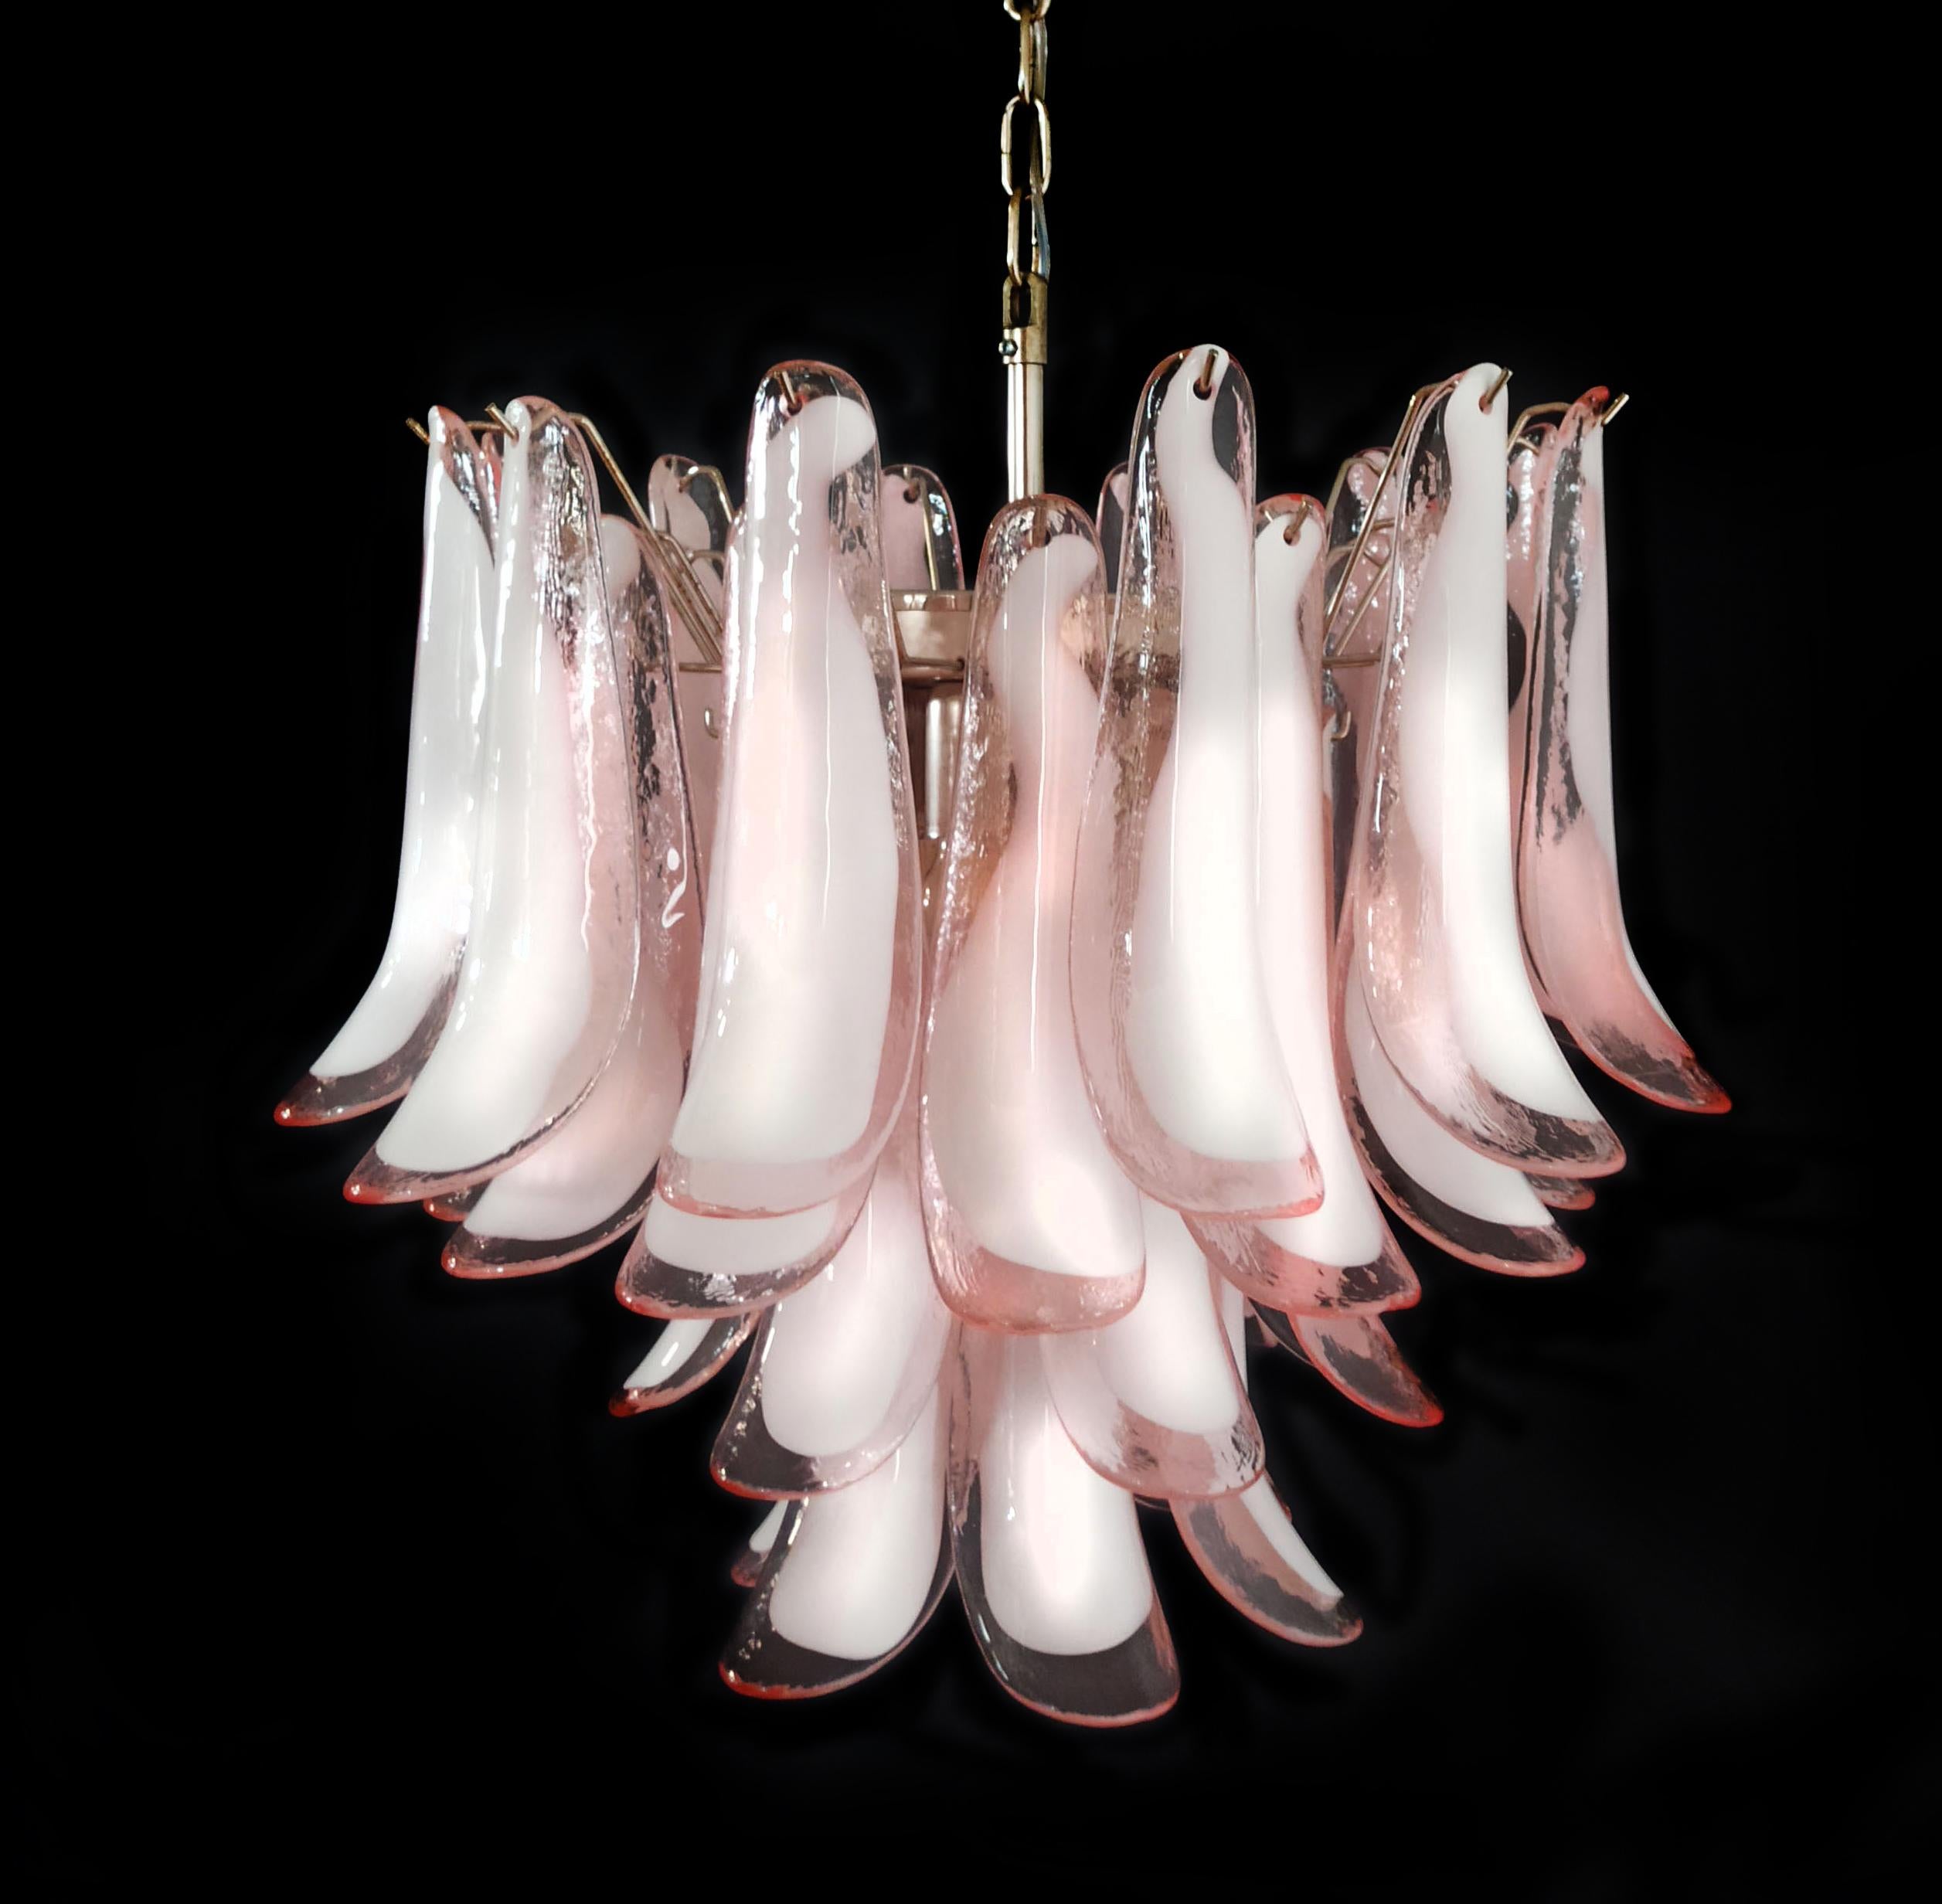 Fantastic chandelier with pink and white “lattimo” glasses, nickel-plated metal frame. It has 36 big monumental petals glass. The glasses are very high quality, the photos do not do the beauty, luster of these glasses.
Period:late XX